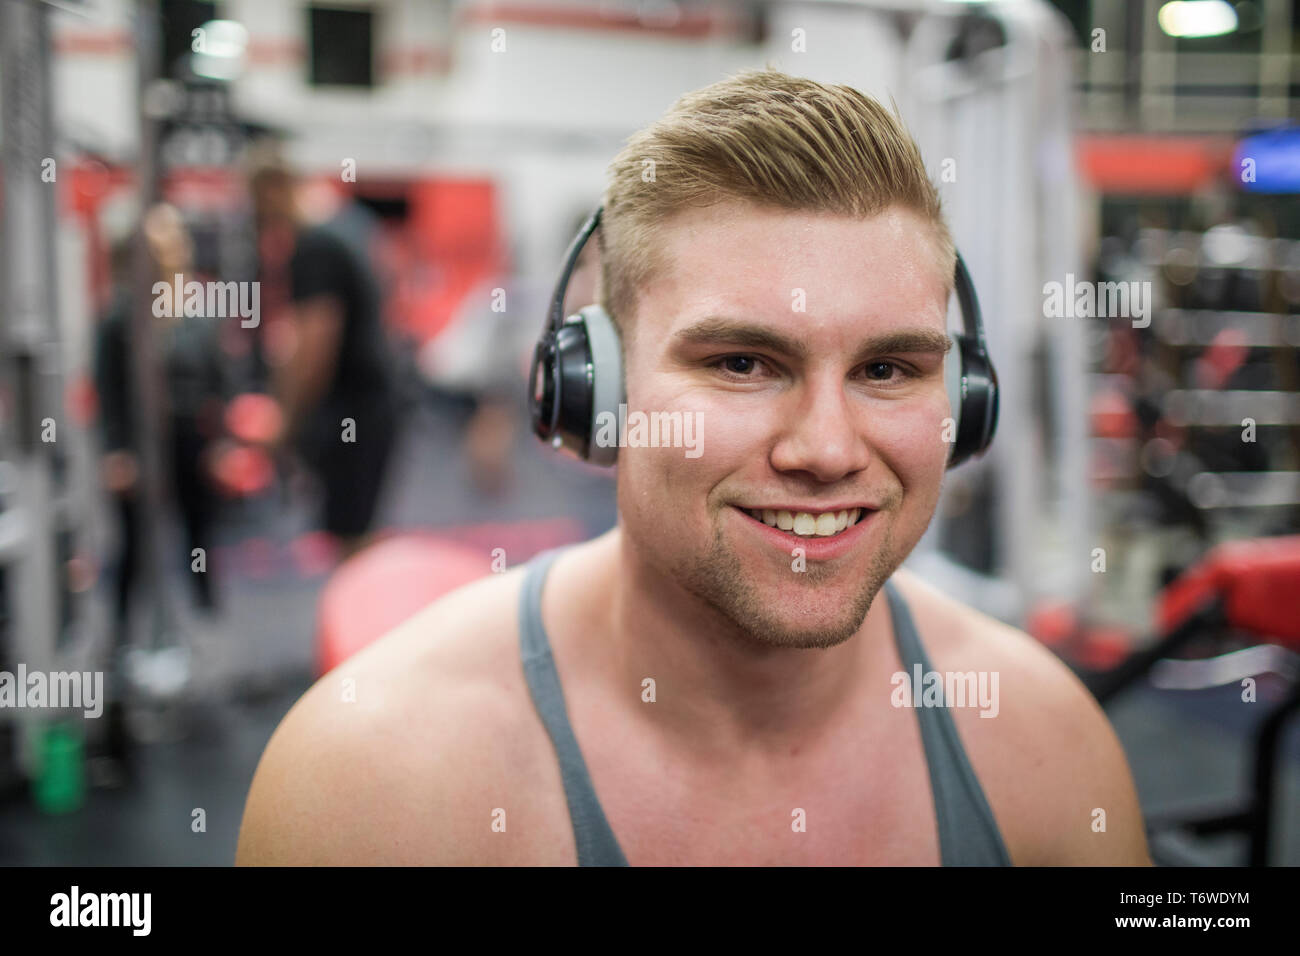 Portrait of bodybuilder wearing headphones at the gym Stock Photo